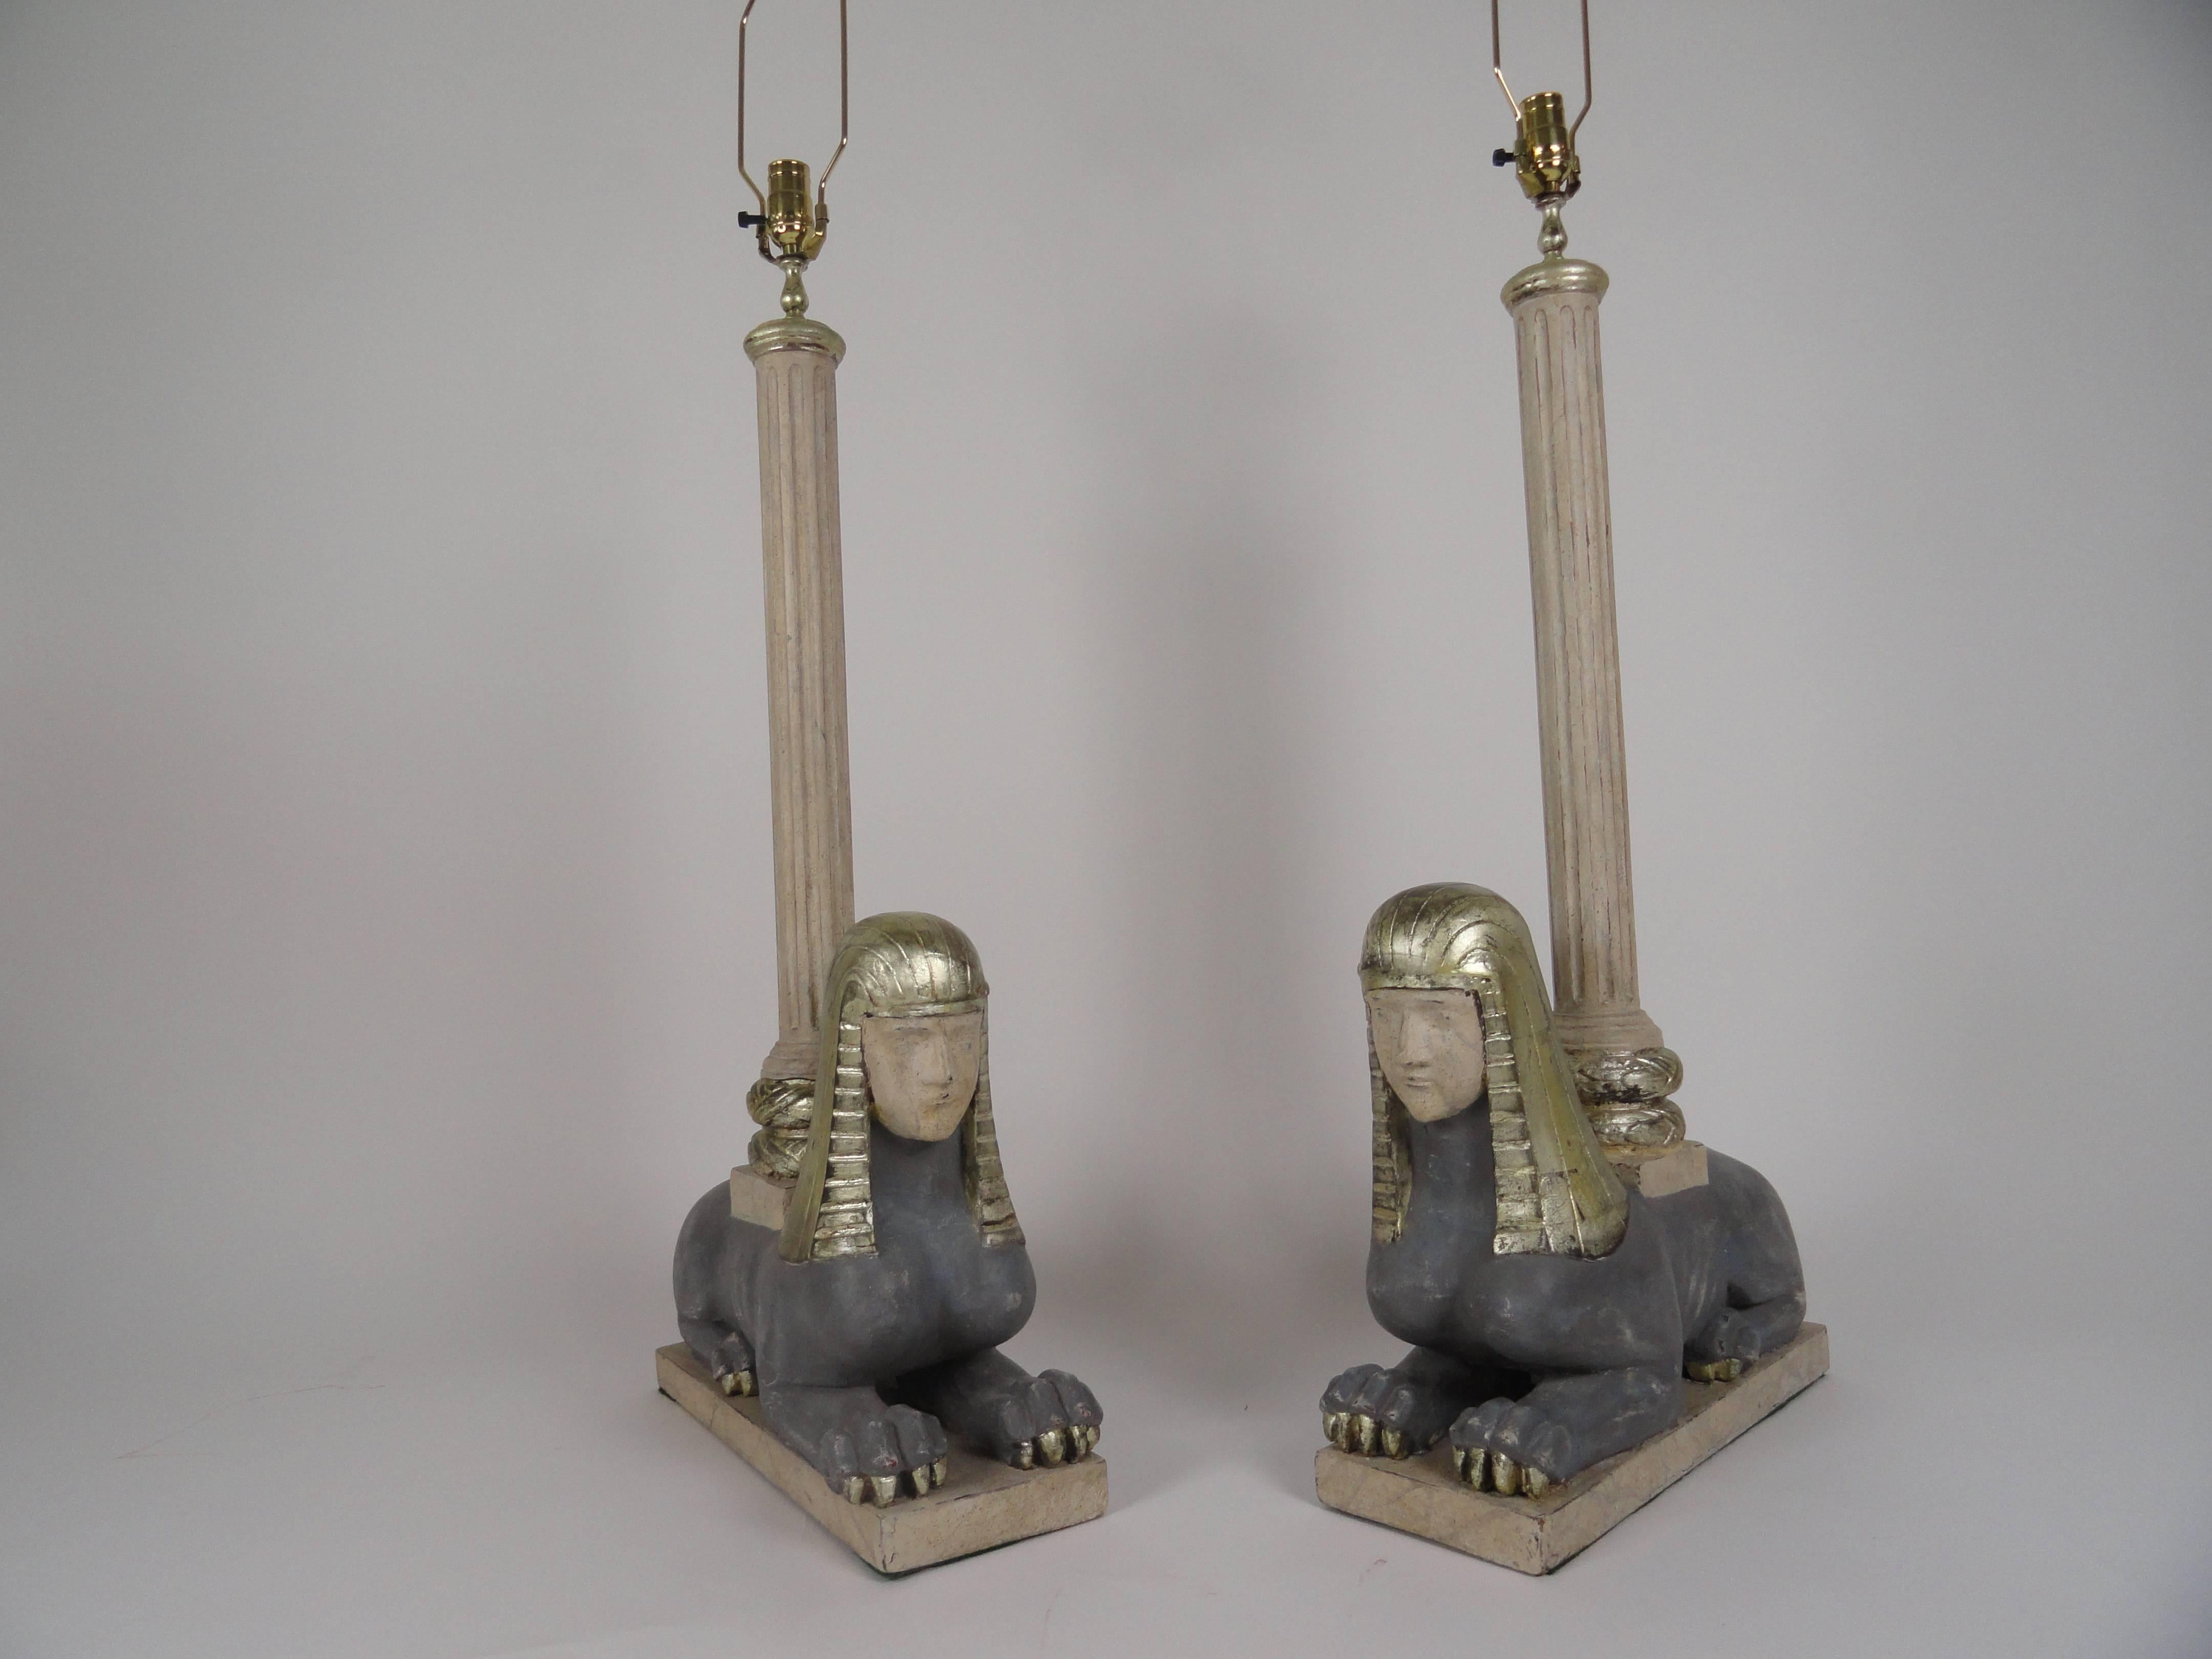 This amazing pair of Bugatti style Egyptian revival fluted column lamps has kneeling Sphinx bases. Pair of Italian lamps in the manner of Bugatti. Carved wood with fluted columns. Newer finish of grey and white gold leaf. Rewired with inline